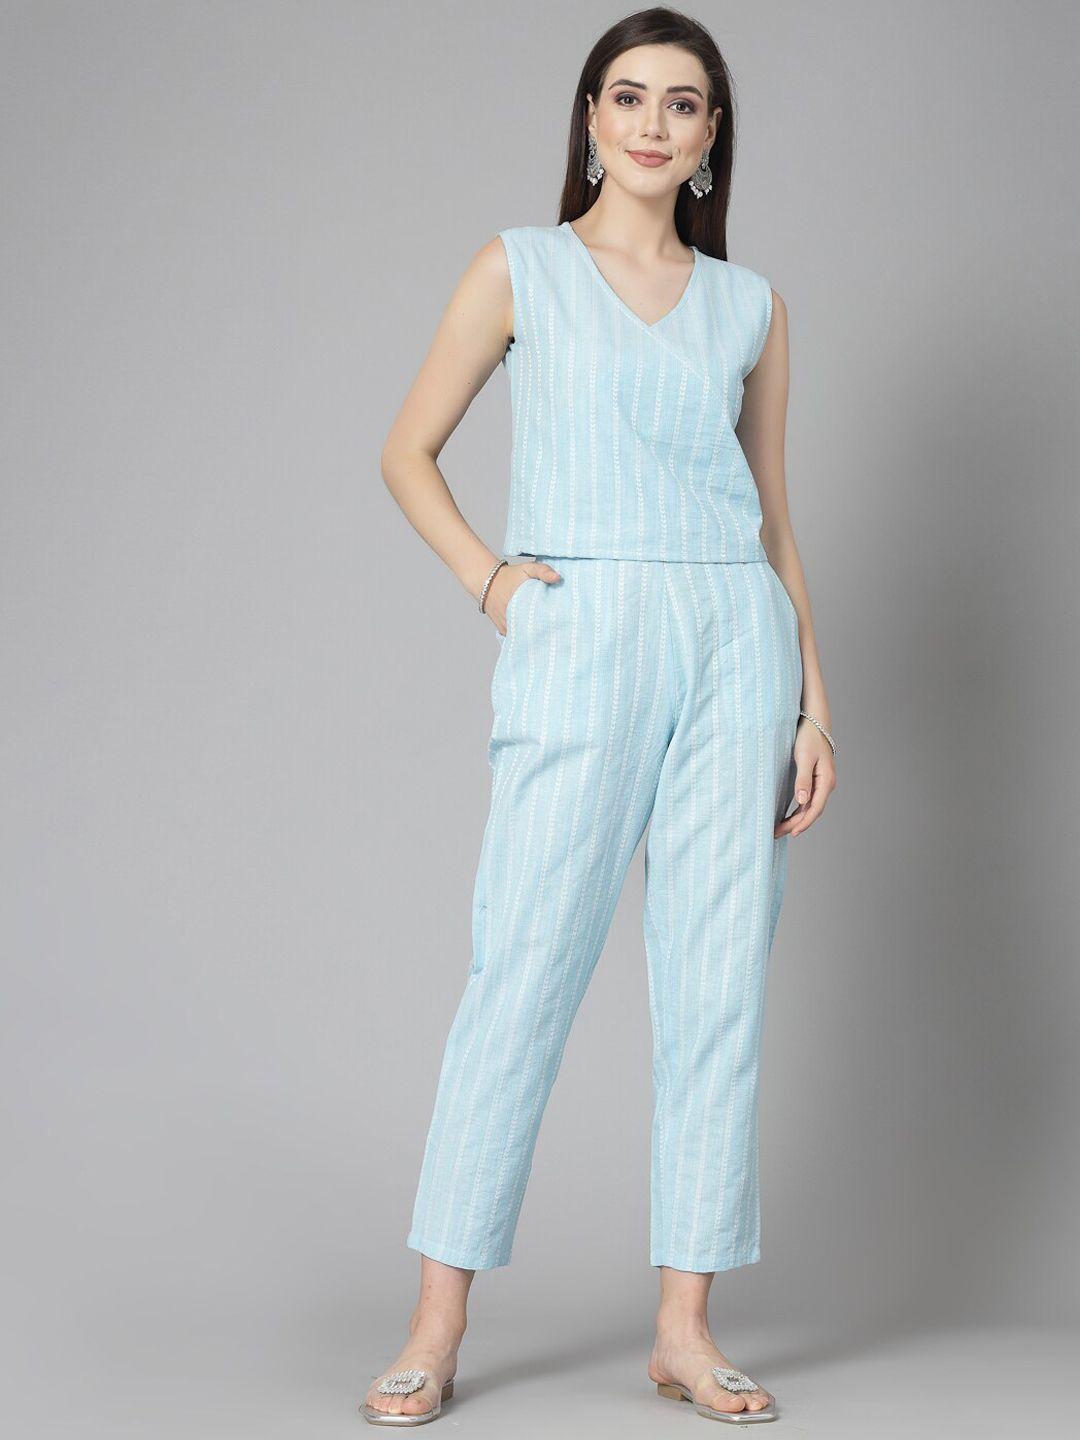 stylum blue & white striped sleevelss top and trouser co-ords